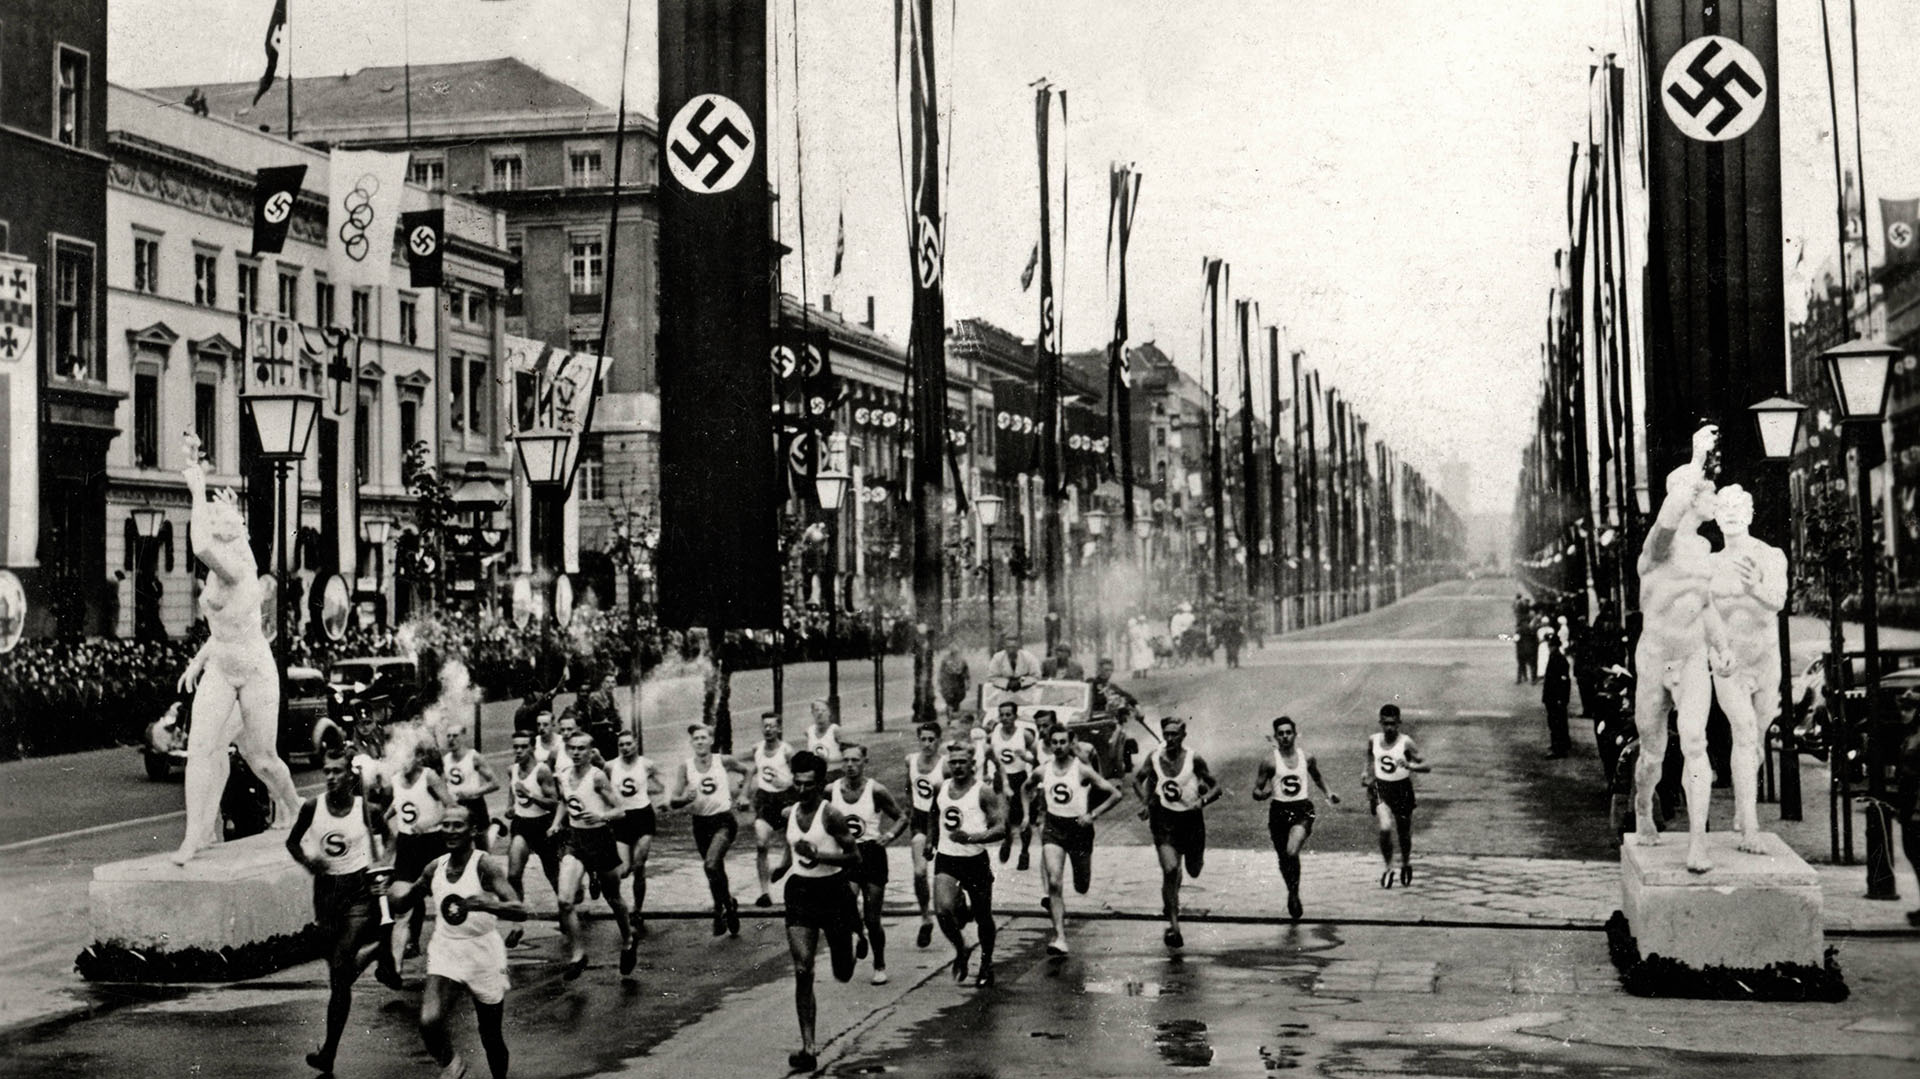 Mandatory Credit: Photo by Cci/Shutterstock (6044433v) The Olympic Flame carried into Berlin, at the beginning of the Olympic Games of 1936, Berlin.  Photograph, Germany, 1936 Art (Sport) - various